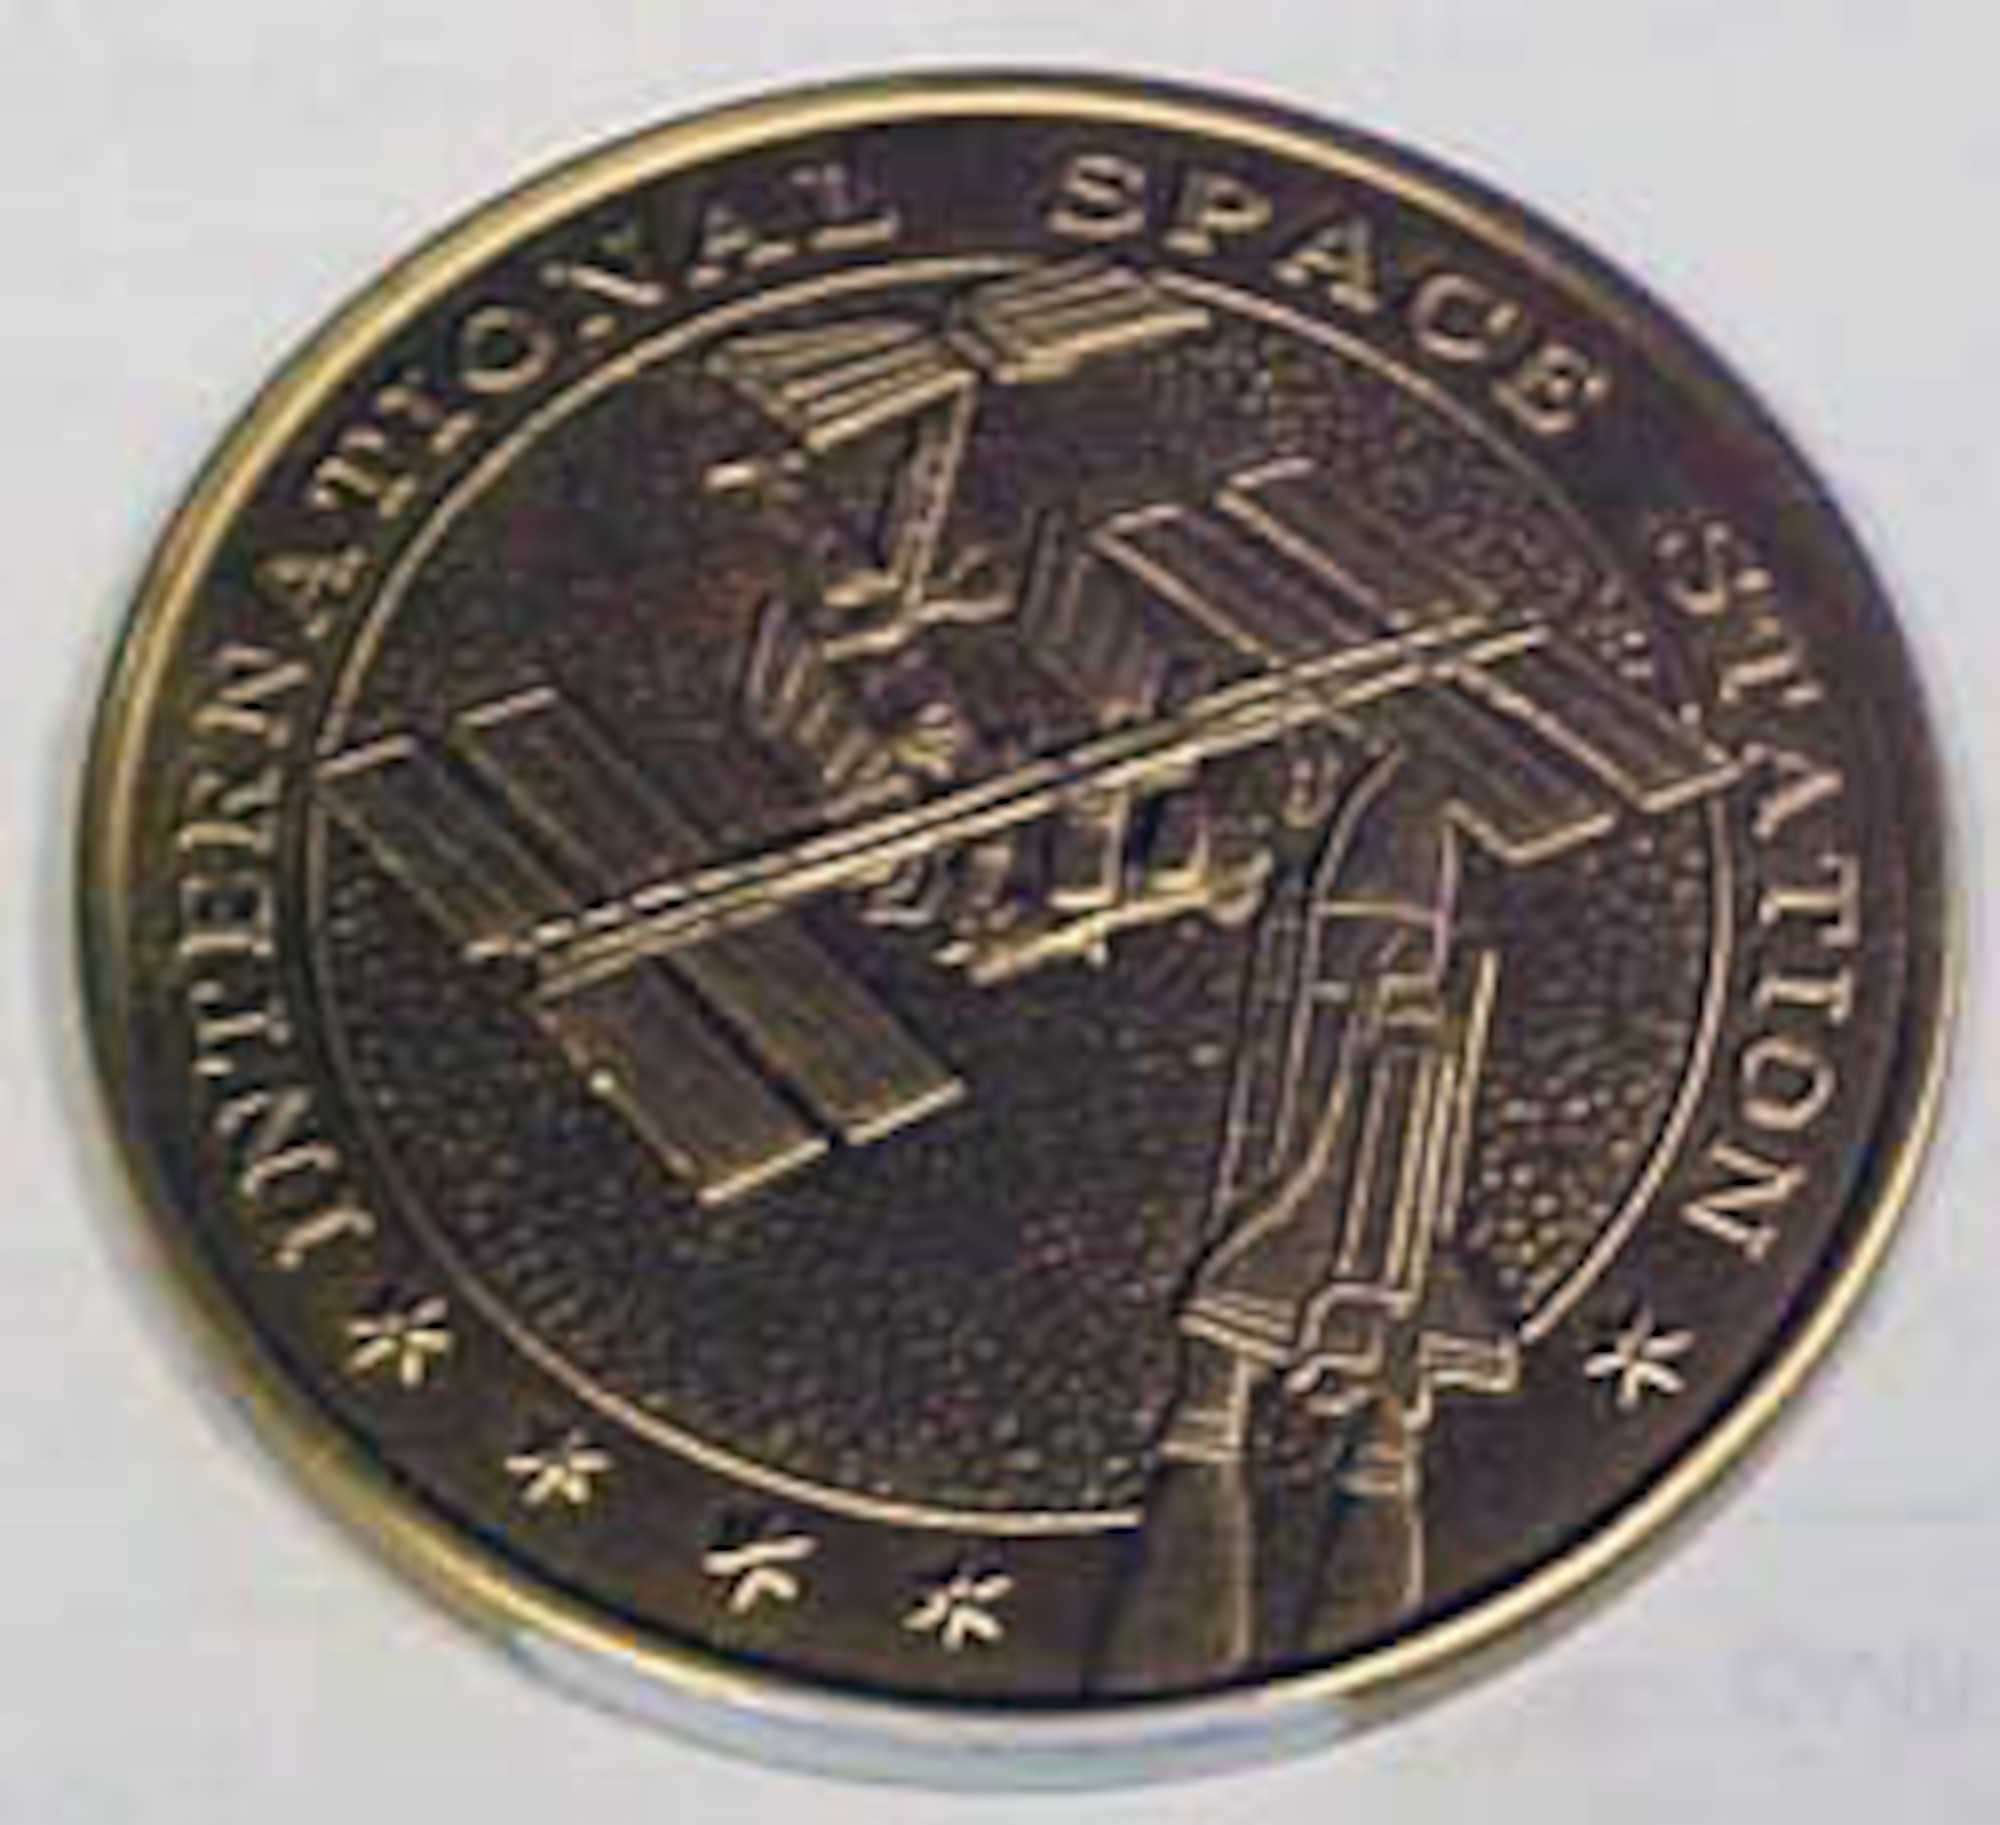 This gold commemorative coin shows the International Space Station and space shuttle. It contains metal from the unity node flown on Mission STS-88. (U.S. Air Force photo)